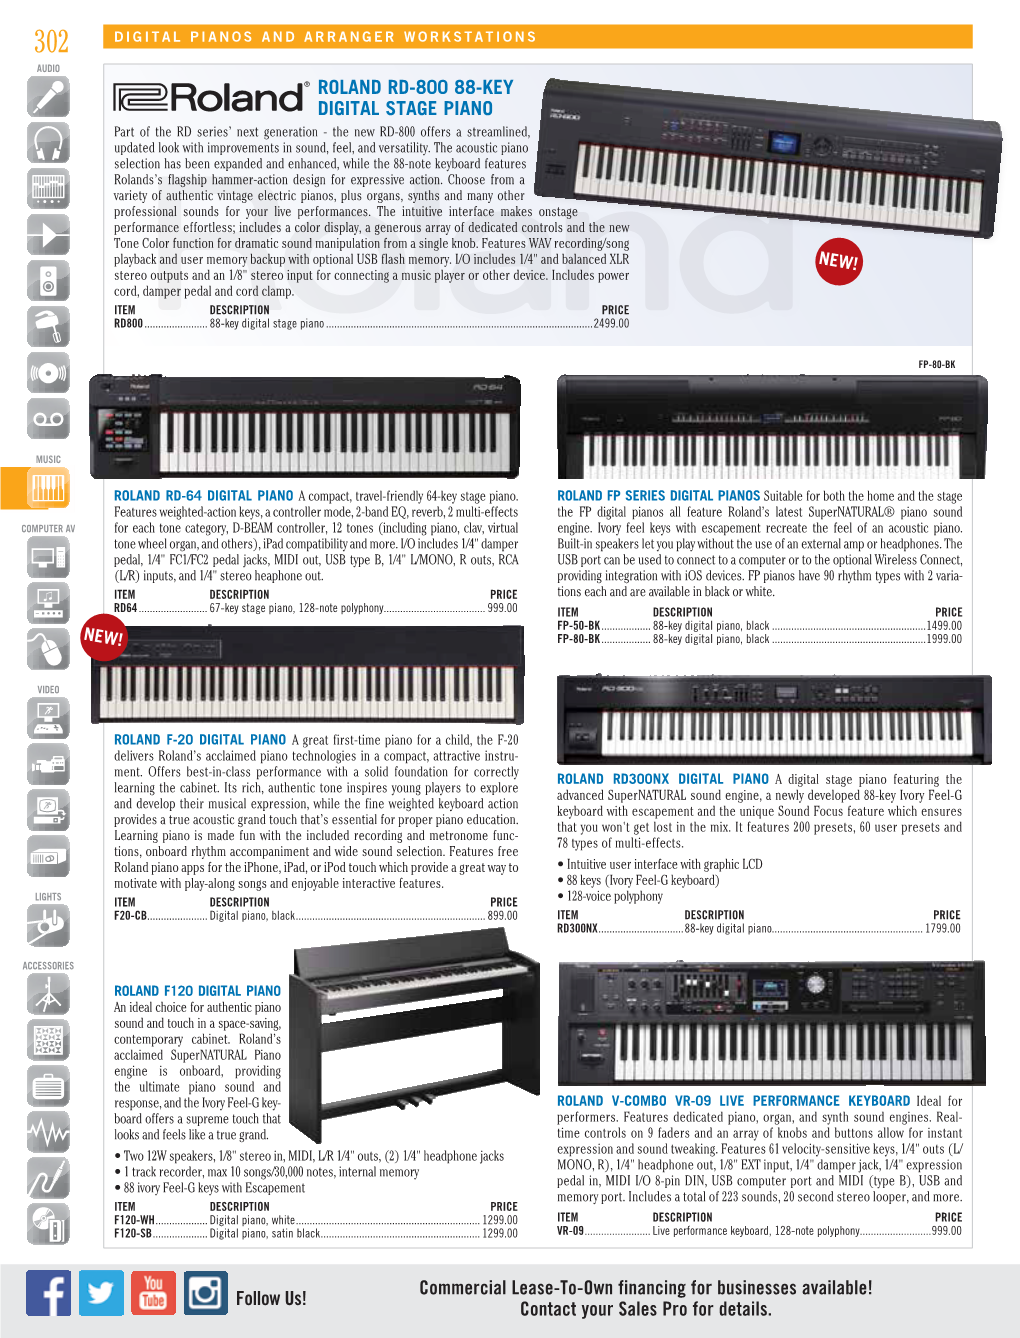 ROLAND RD-800 88-Key DIGITAL Stage PIANO Commercial Lease